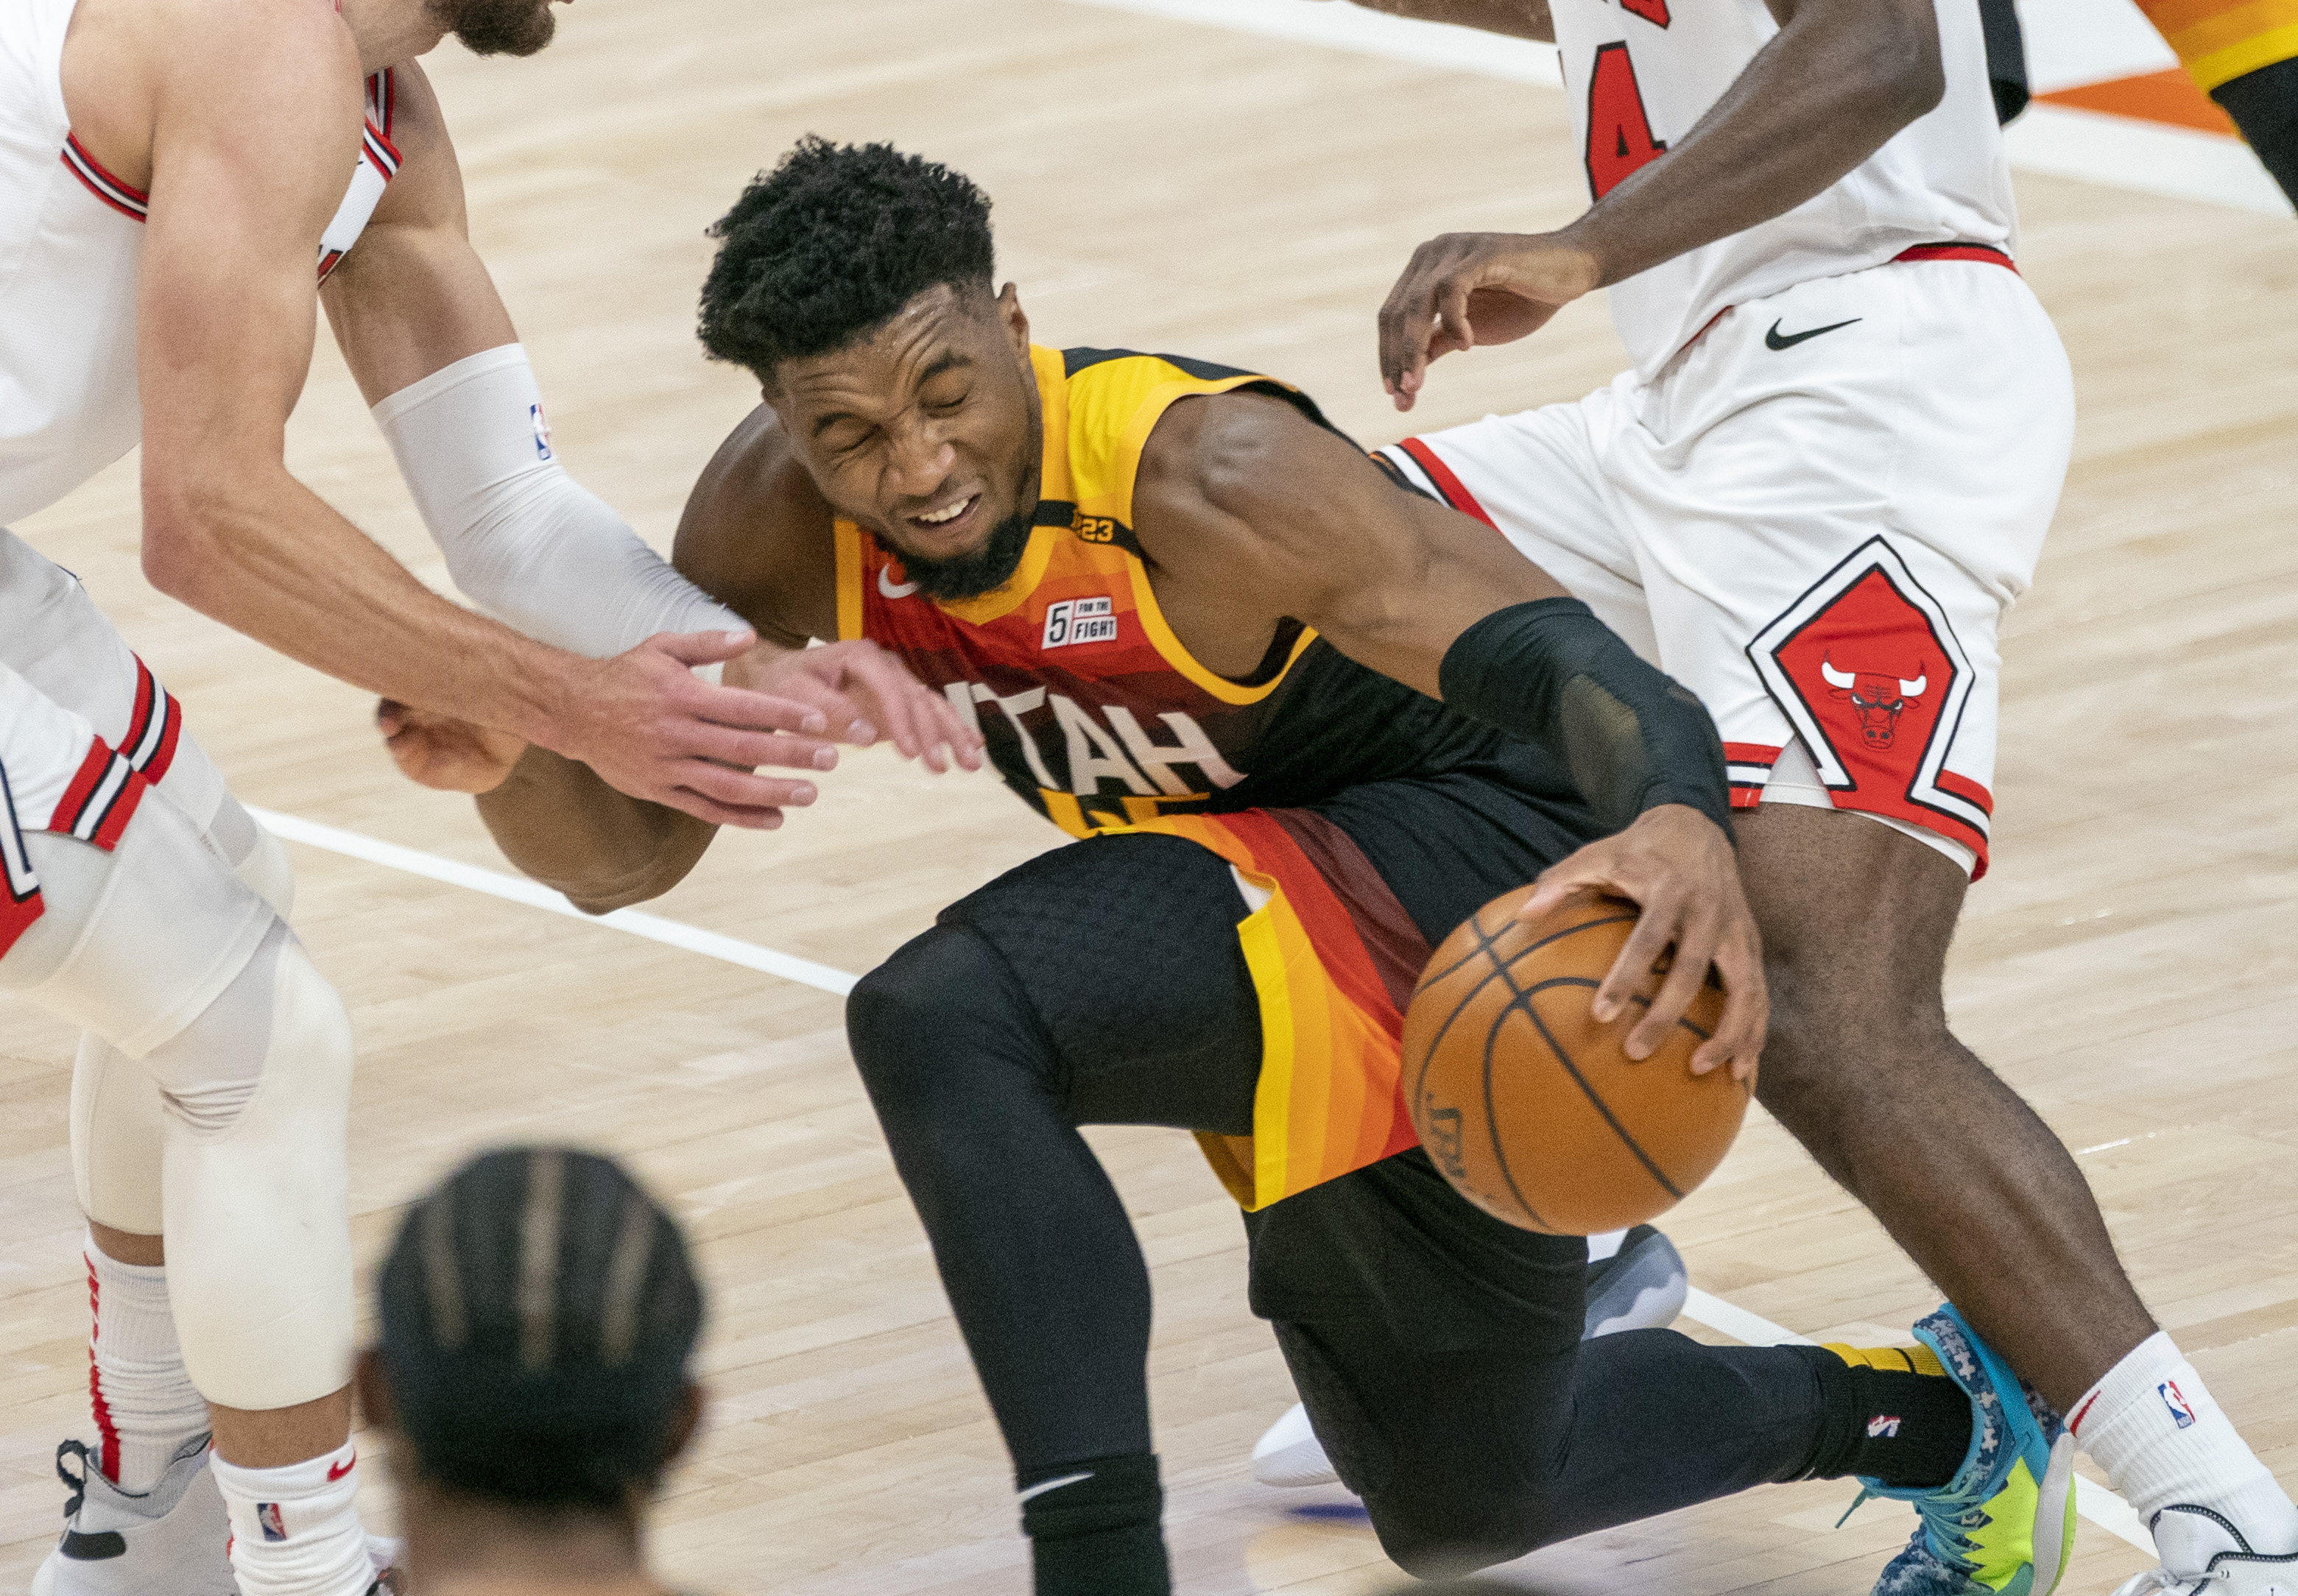 A memory for Wyatt—Jazz guard Donovan Mitchell gives game-worn sneakers to  a Utah boy with terminal cancer